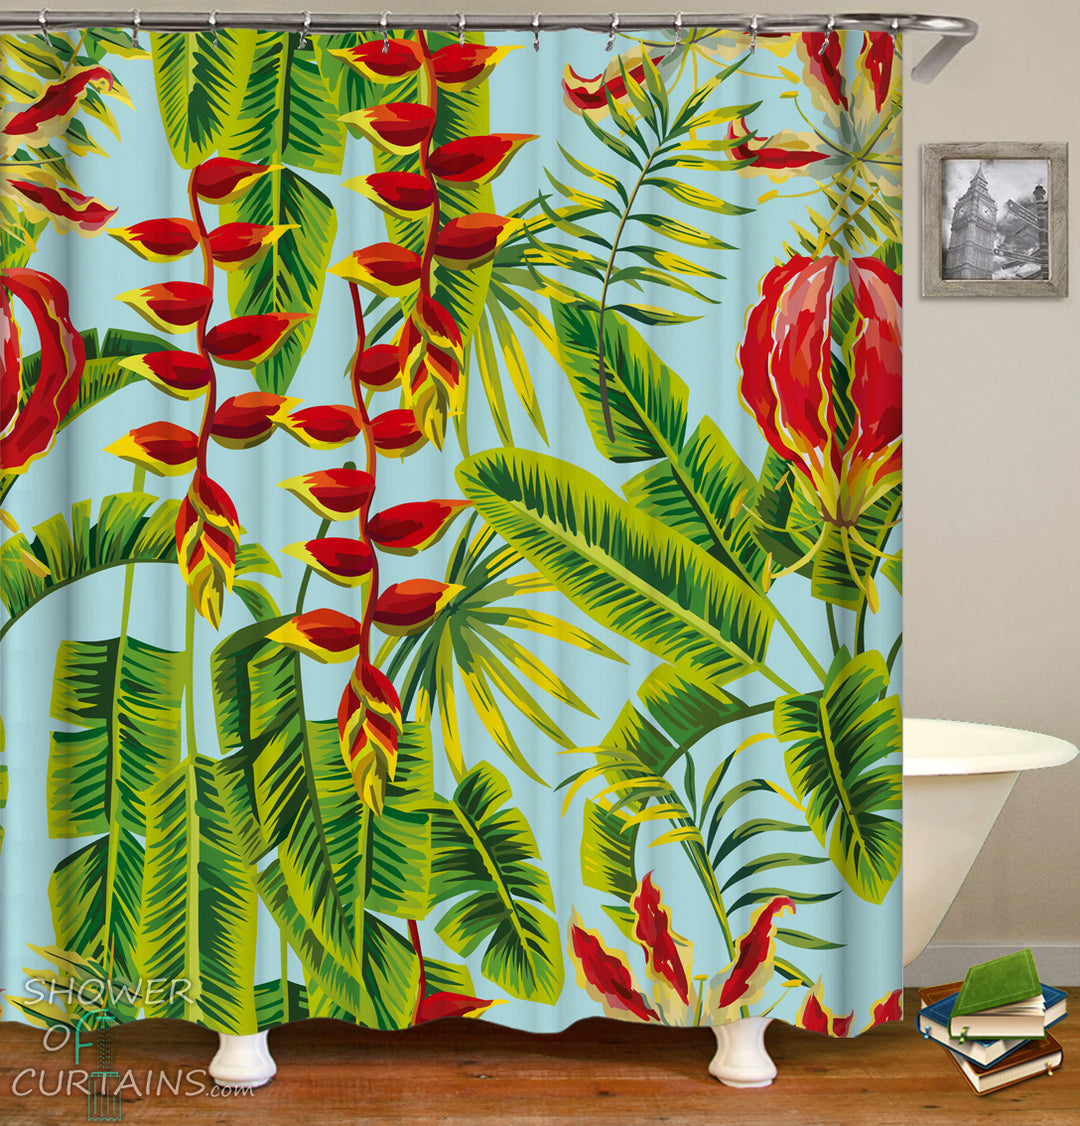 Tropical Shower Curtains - Red And Green Tropical